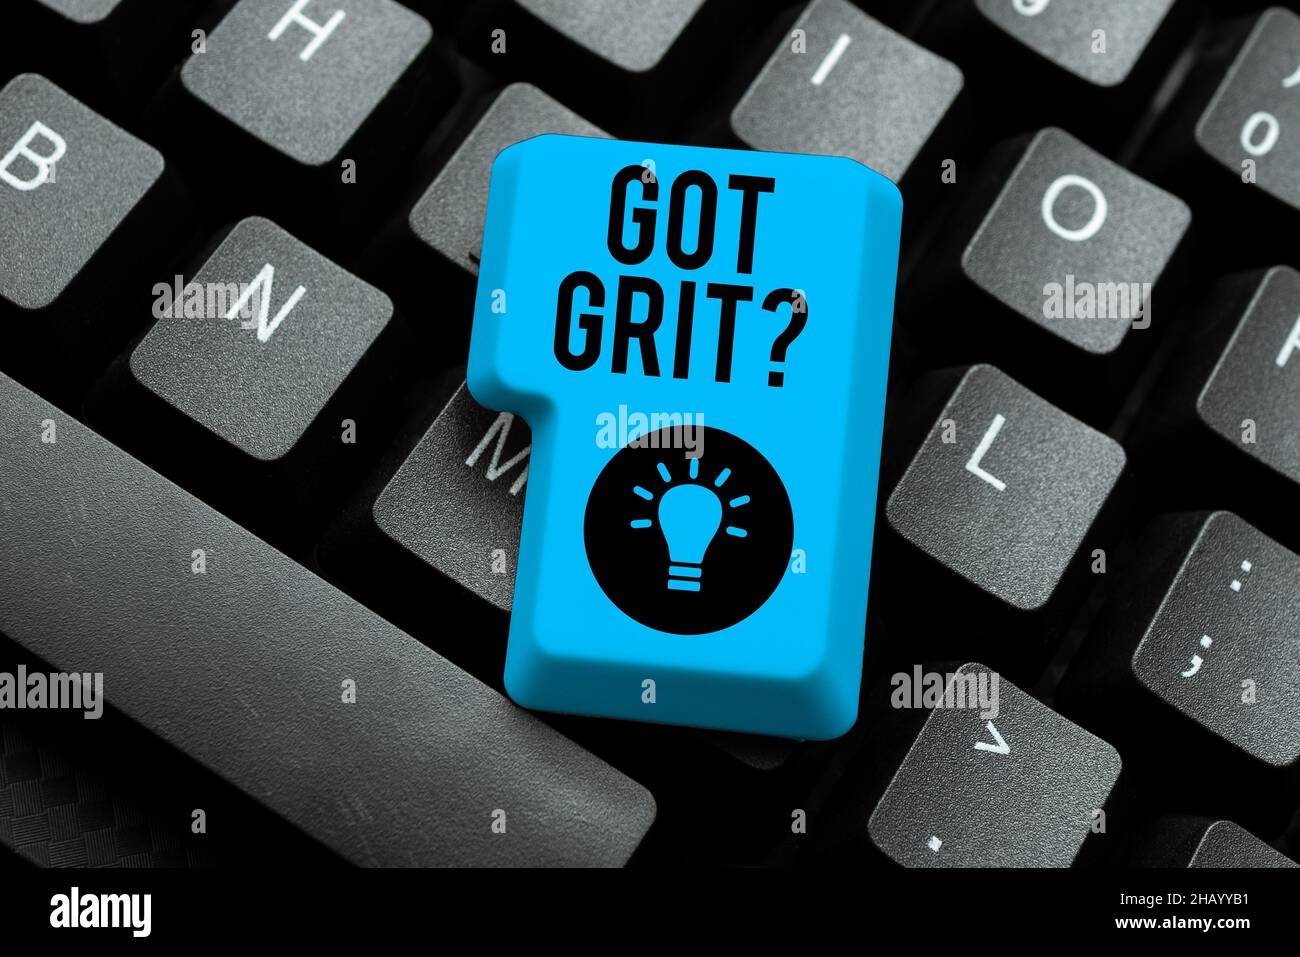 Sign displaying Got Grit Question. Business concept A hardwork with perseverance towards the desired goal Setting Up New Online Blog Website, Typing Stock Photo